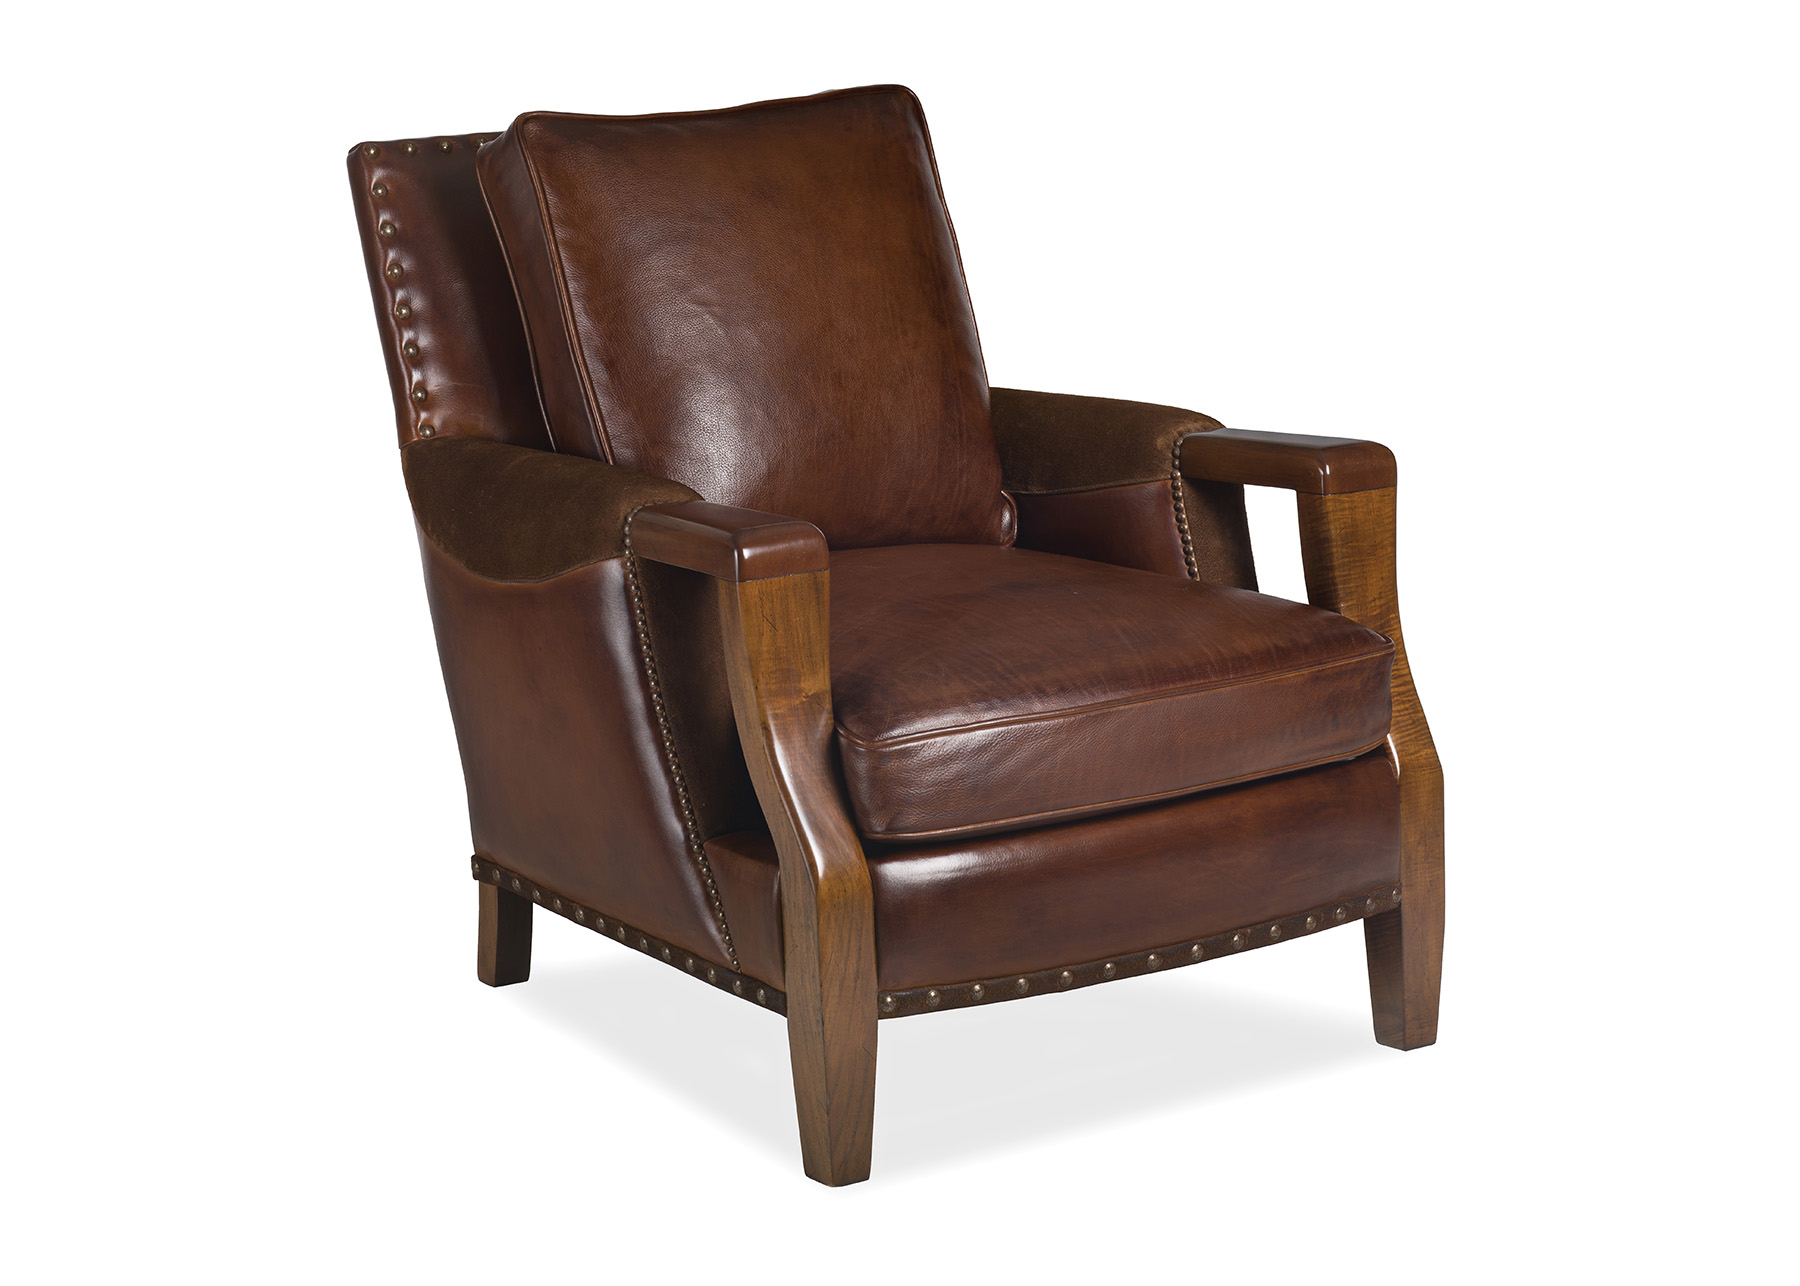 KNEEMORE CHAIR W/TOP ARM PANELS